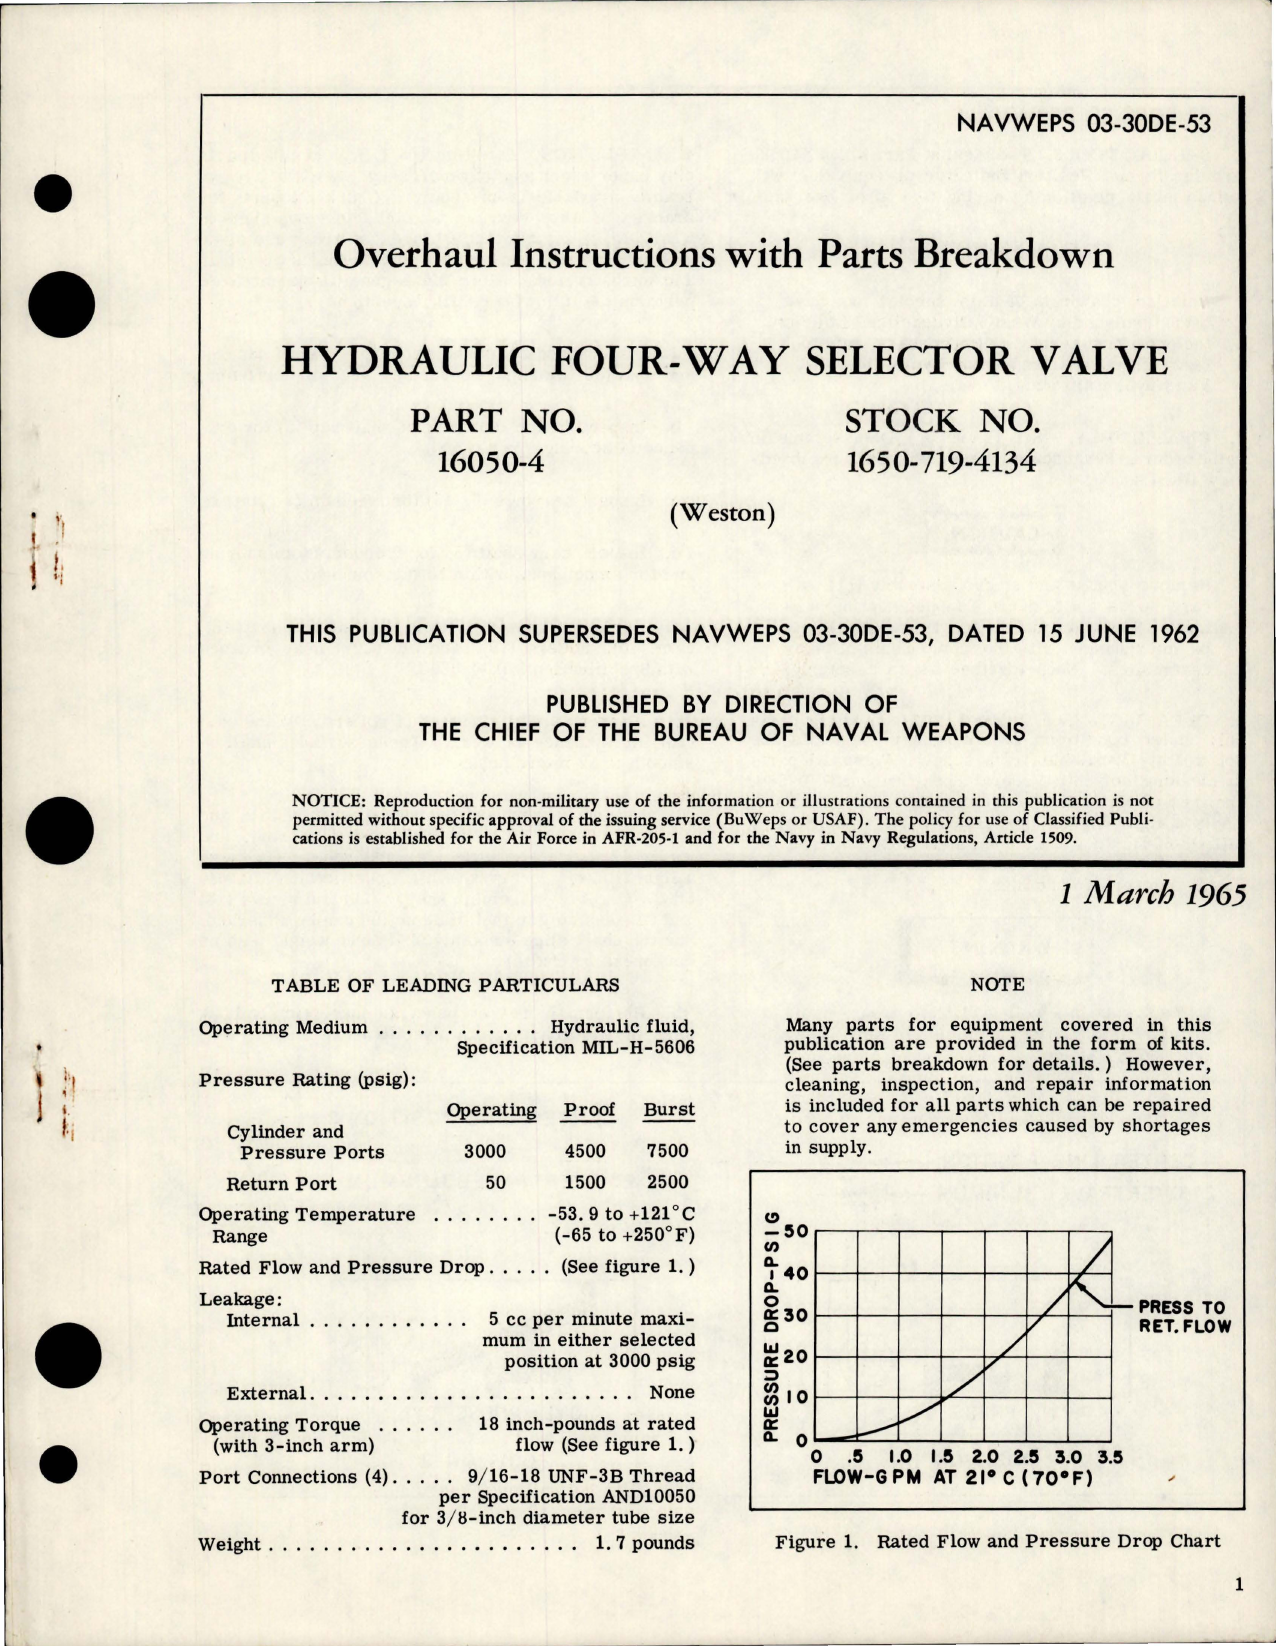 Sample page 1 from AirCorps Library document: Overhaul Instructions with Parts for Hydraulic Four Way Selector Valve - Part 16050-4 - Stock 1650-719-4134